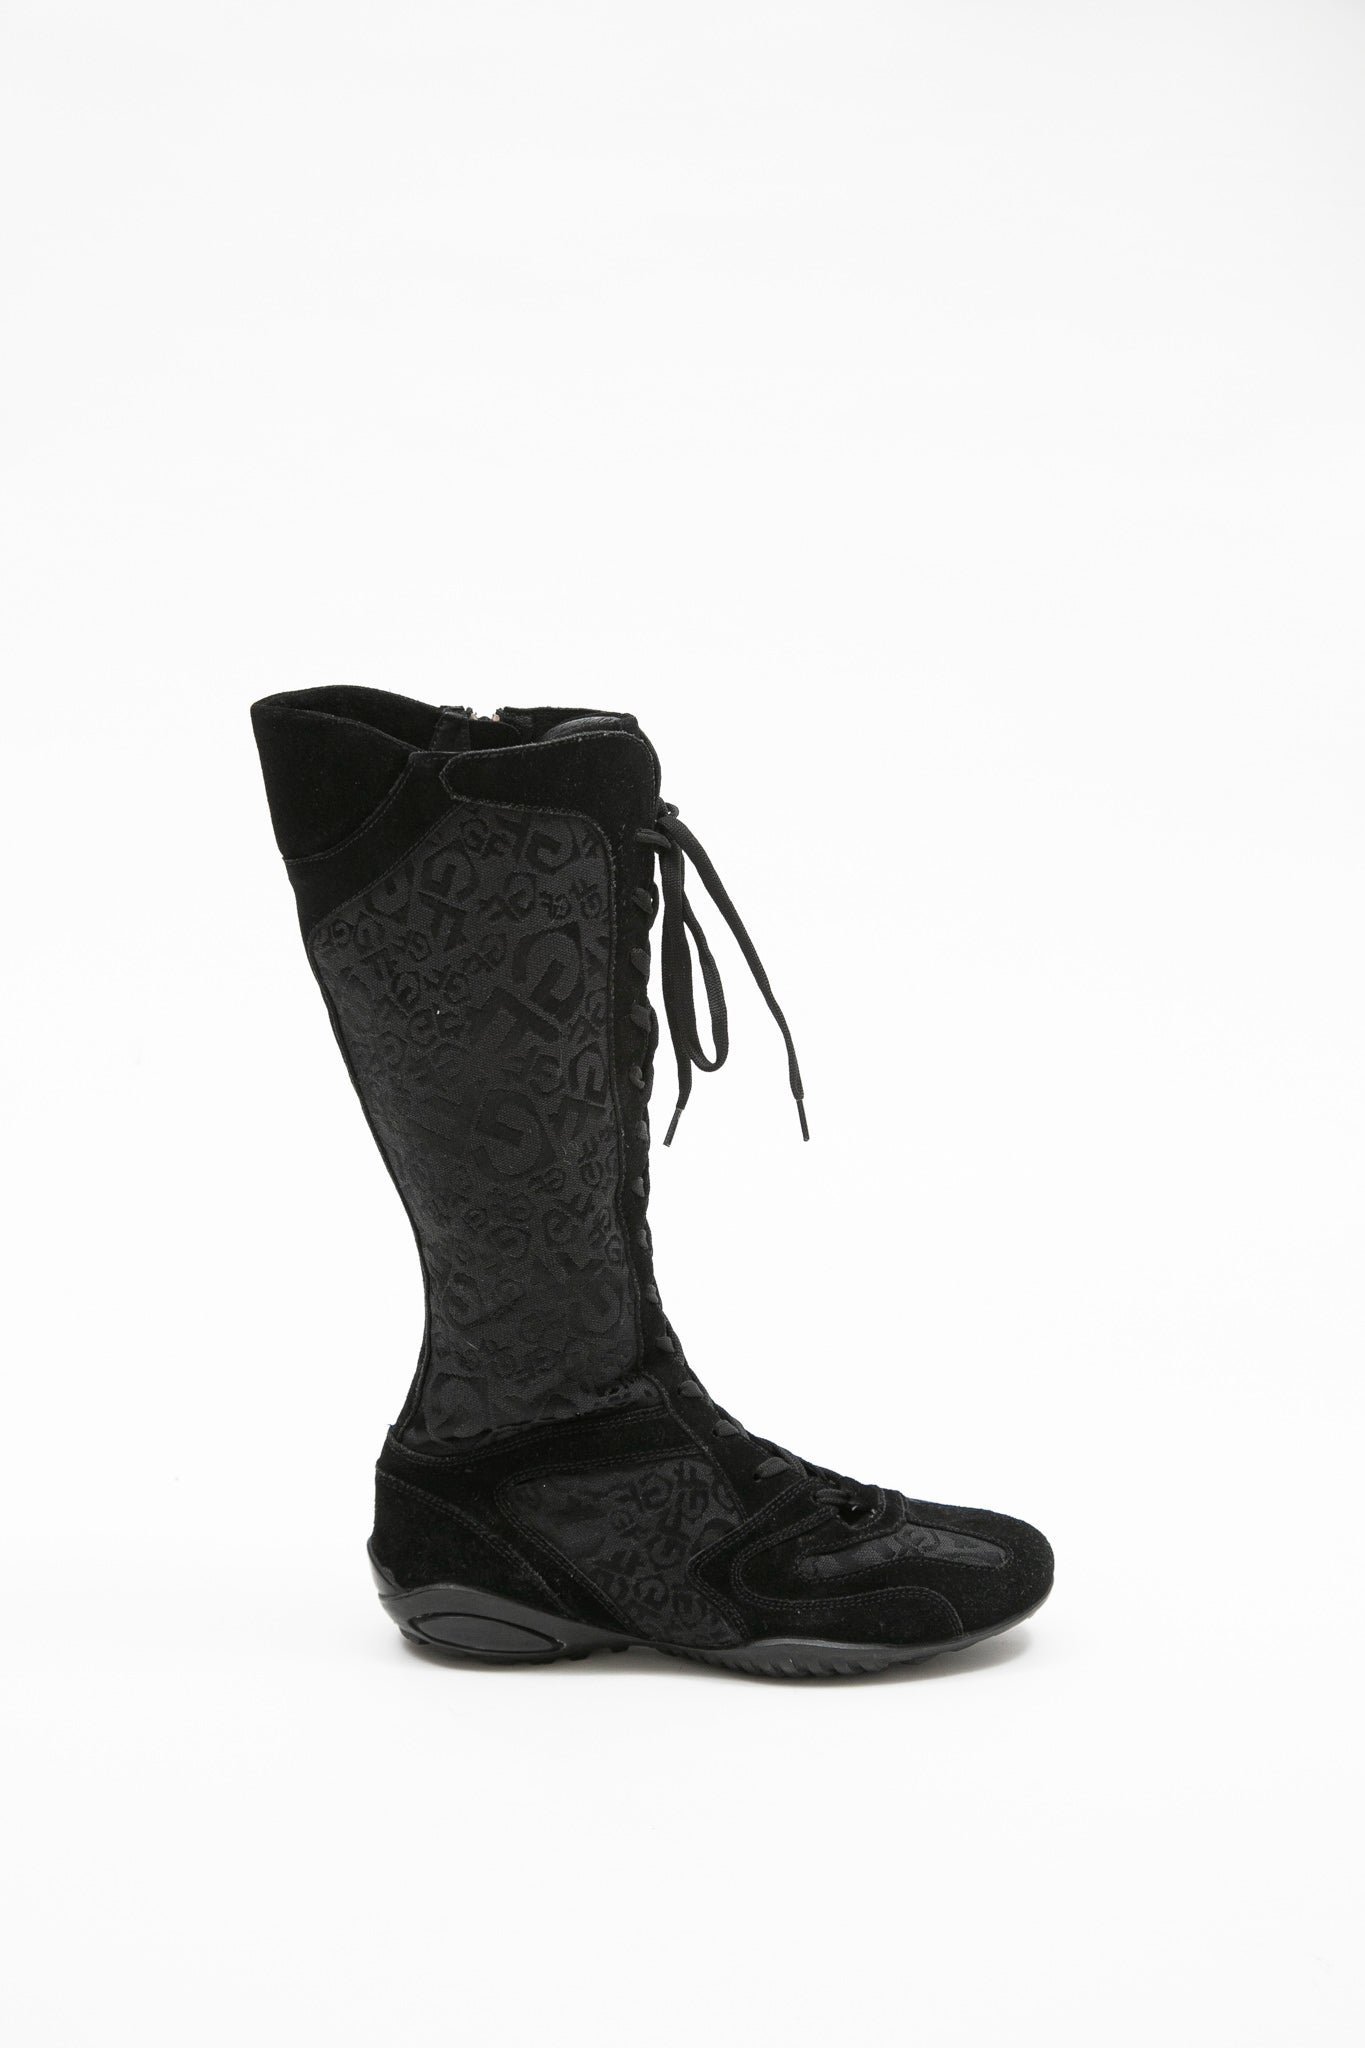 Gianfranco Ferre Lace-up Boxing Boots